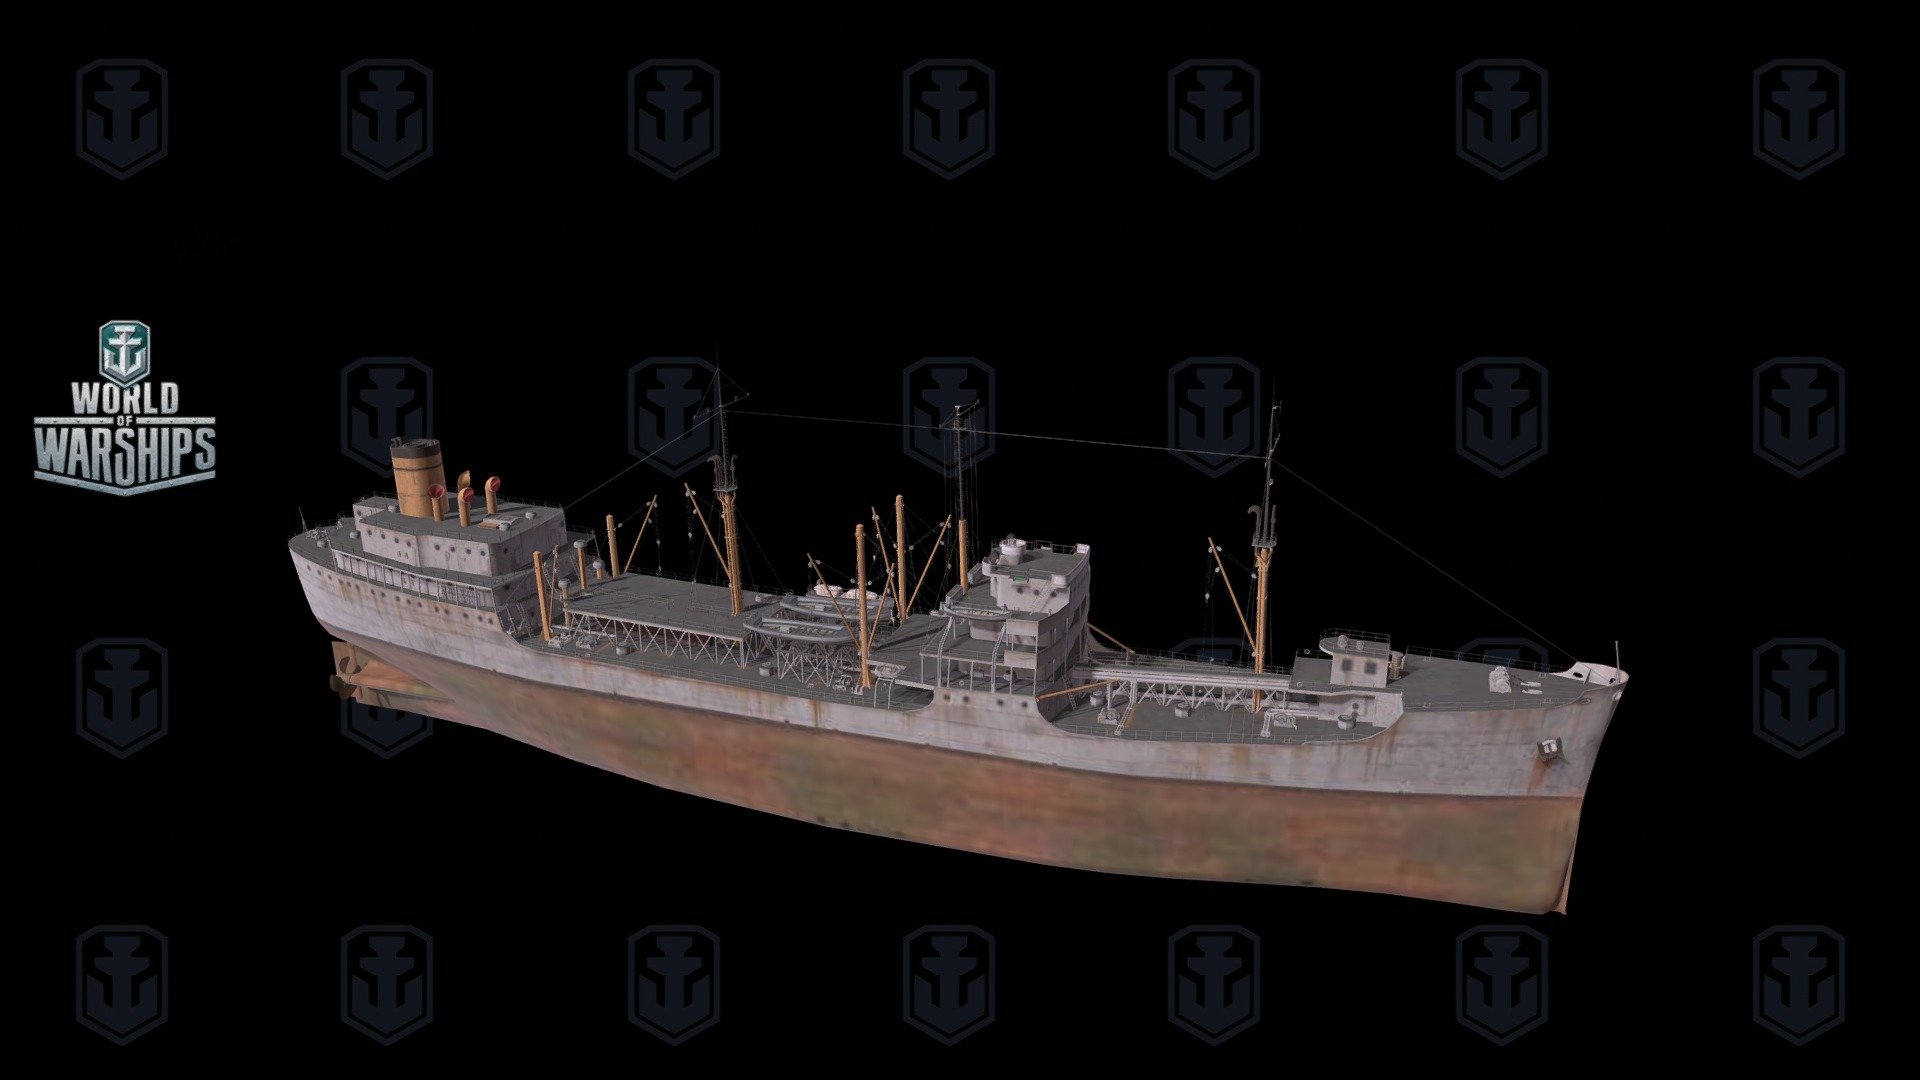 If you want to see this ship in action, you can use these links to register in World of Warships. If you choose so, you'll get a week of WoWS premium account and premium battleship Dreadnought.




CIS server

NA server

EU server

SEA server 

Please note that this offer ends on 07/01/2022 3d model